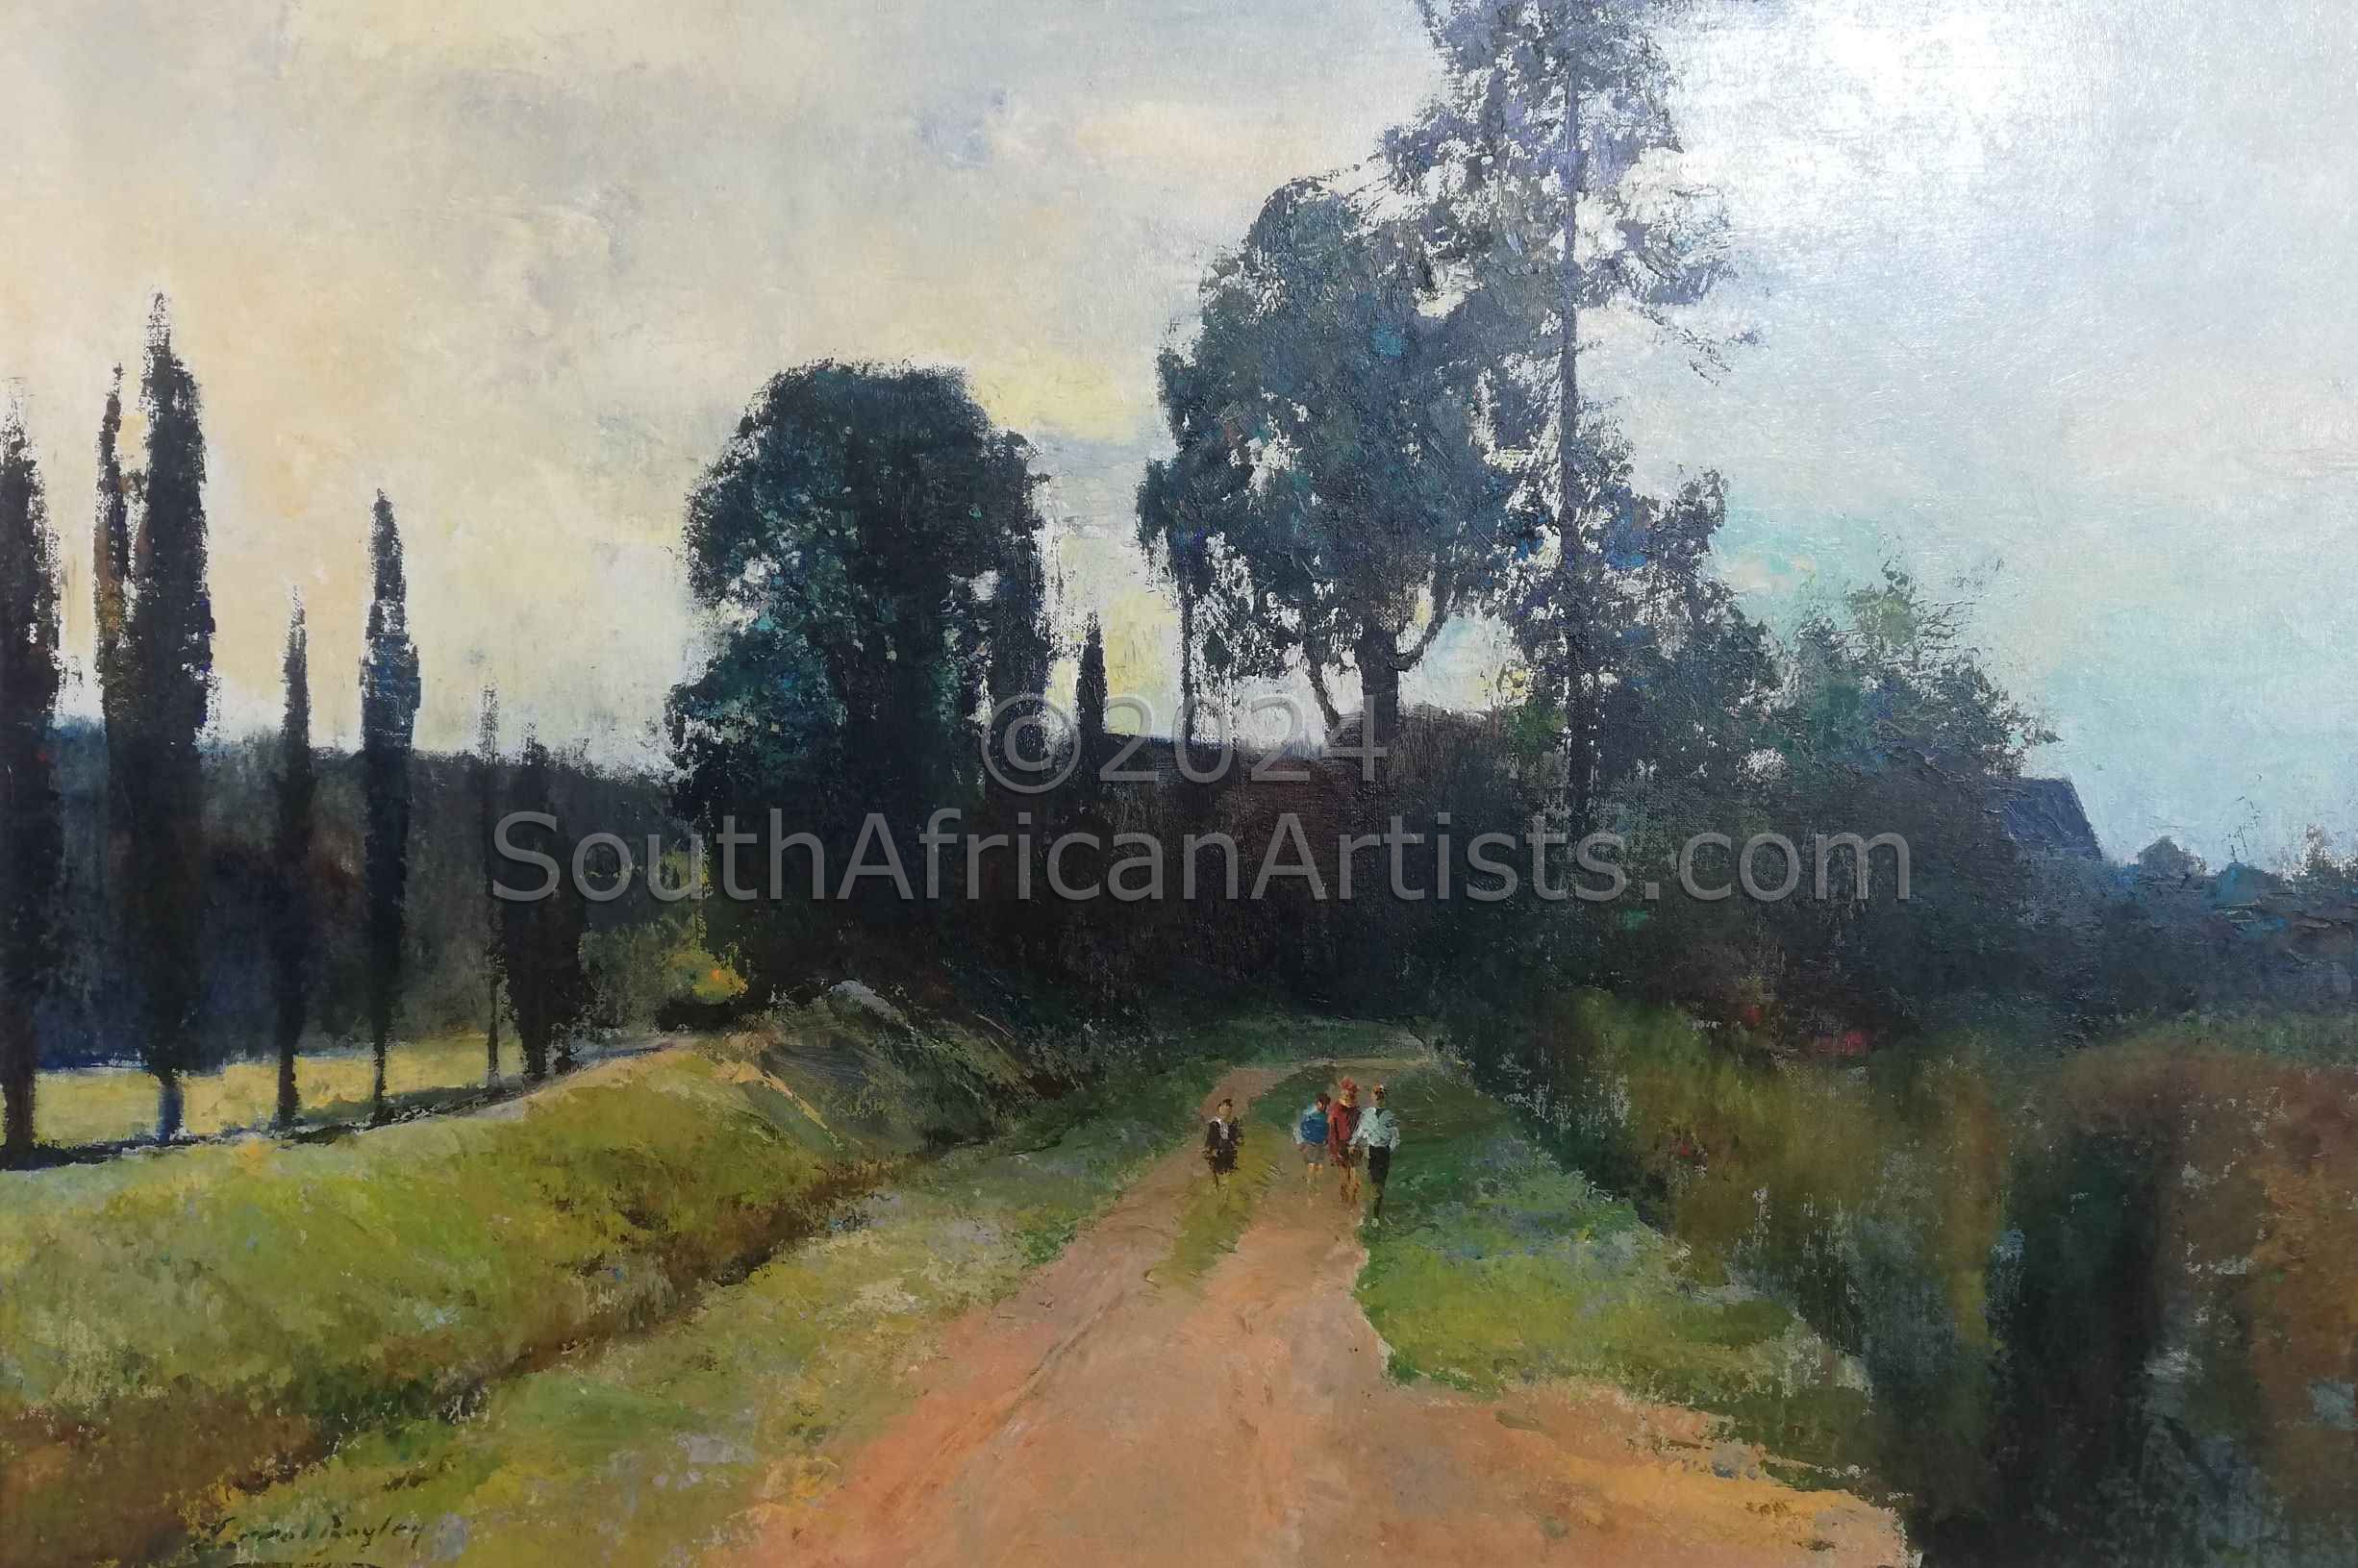 The Children on a Country Road